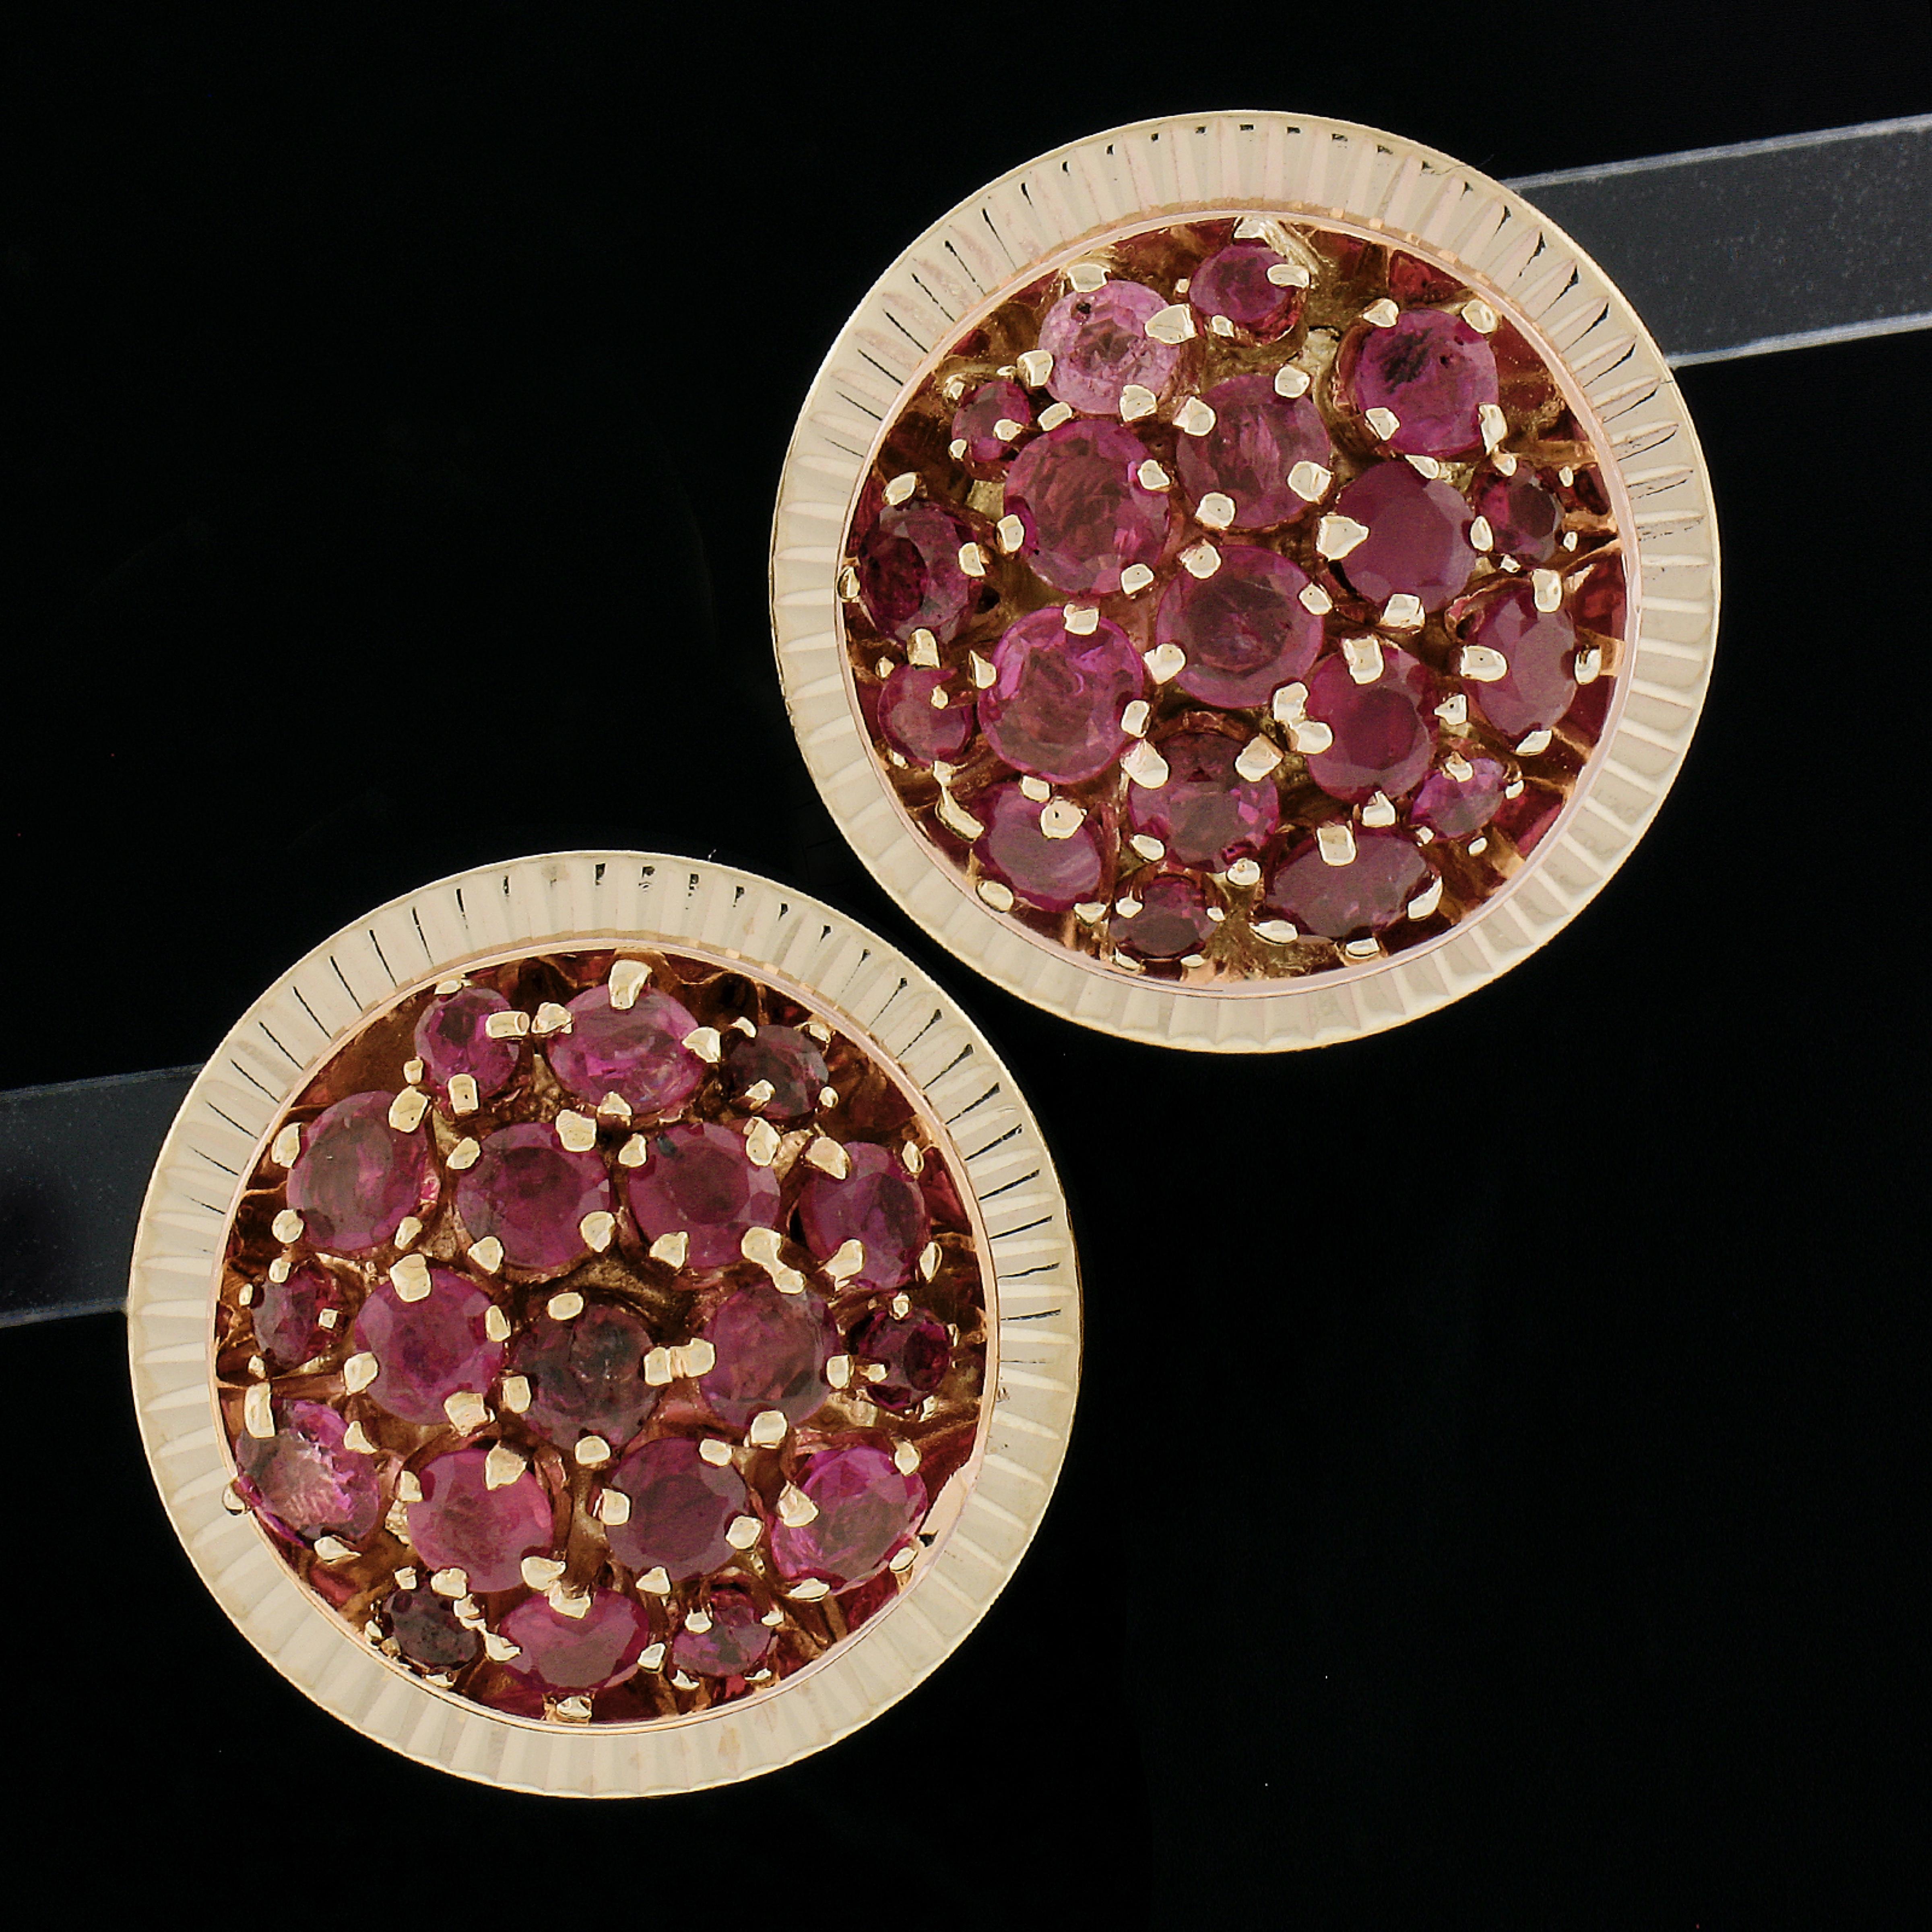 --Stone(s):--
Numerous Natural Genuine Rubies - Old Cut - Pave Set - Pinkish Red Color
Total Carat Weight:	3.0 (approx.)

Material: Solid 14k Yellow Gold 
Weight: 10.95 Grams
Backing:	Posts w/ Omega Closures (Pierced ears are required.)
Diameter: